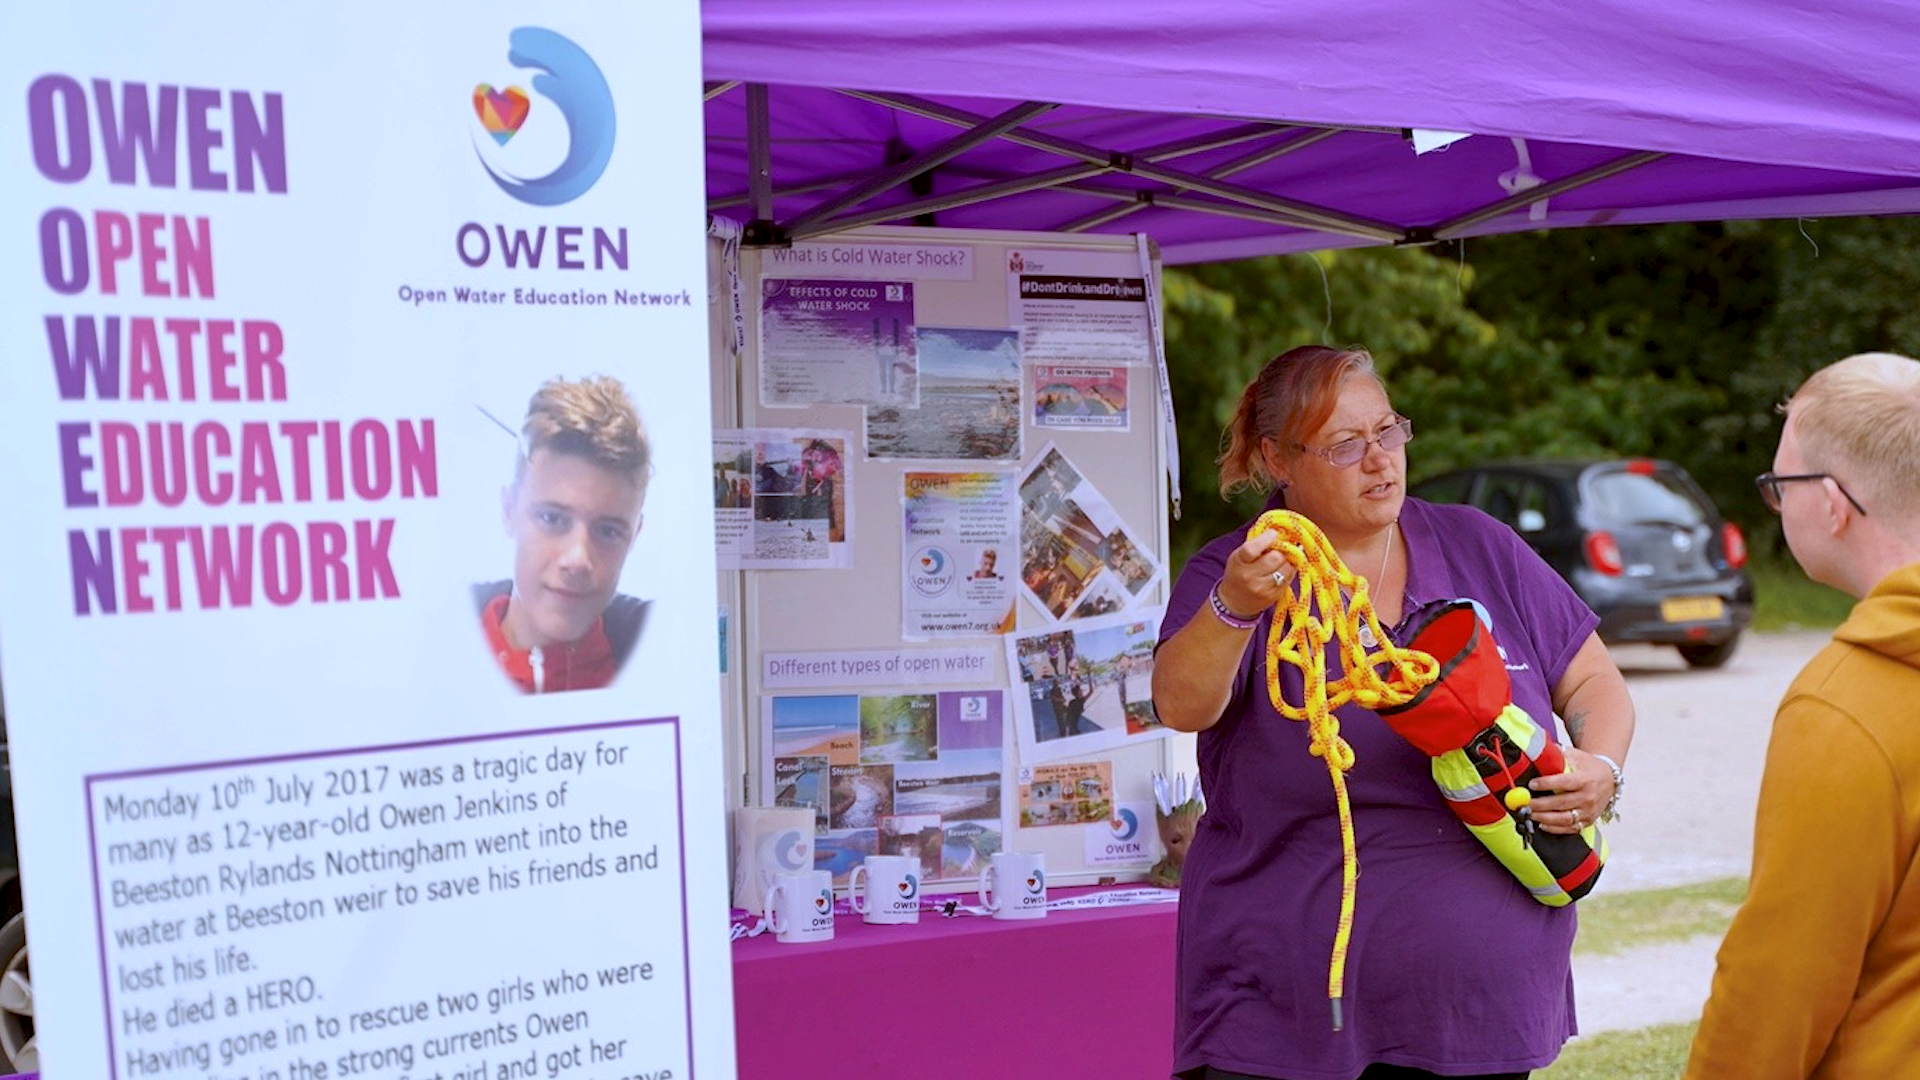 A woman campaigning for the Owen Open Water Education Network